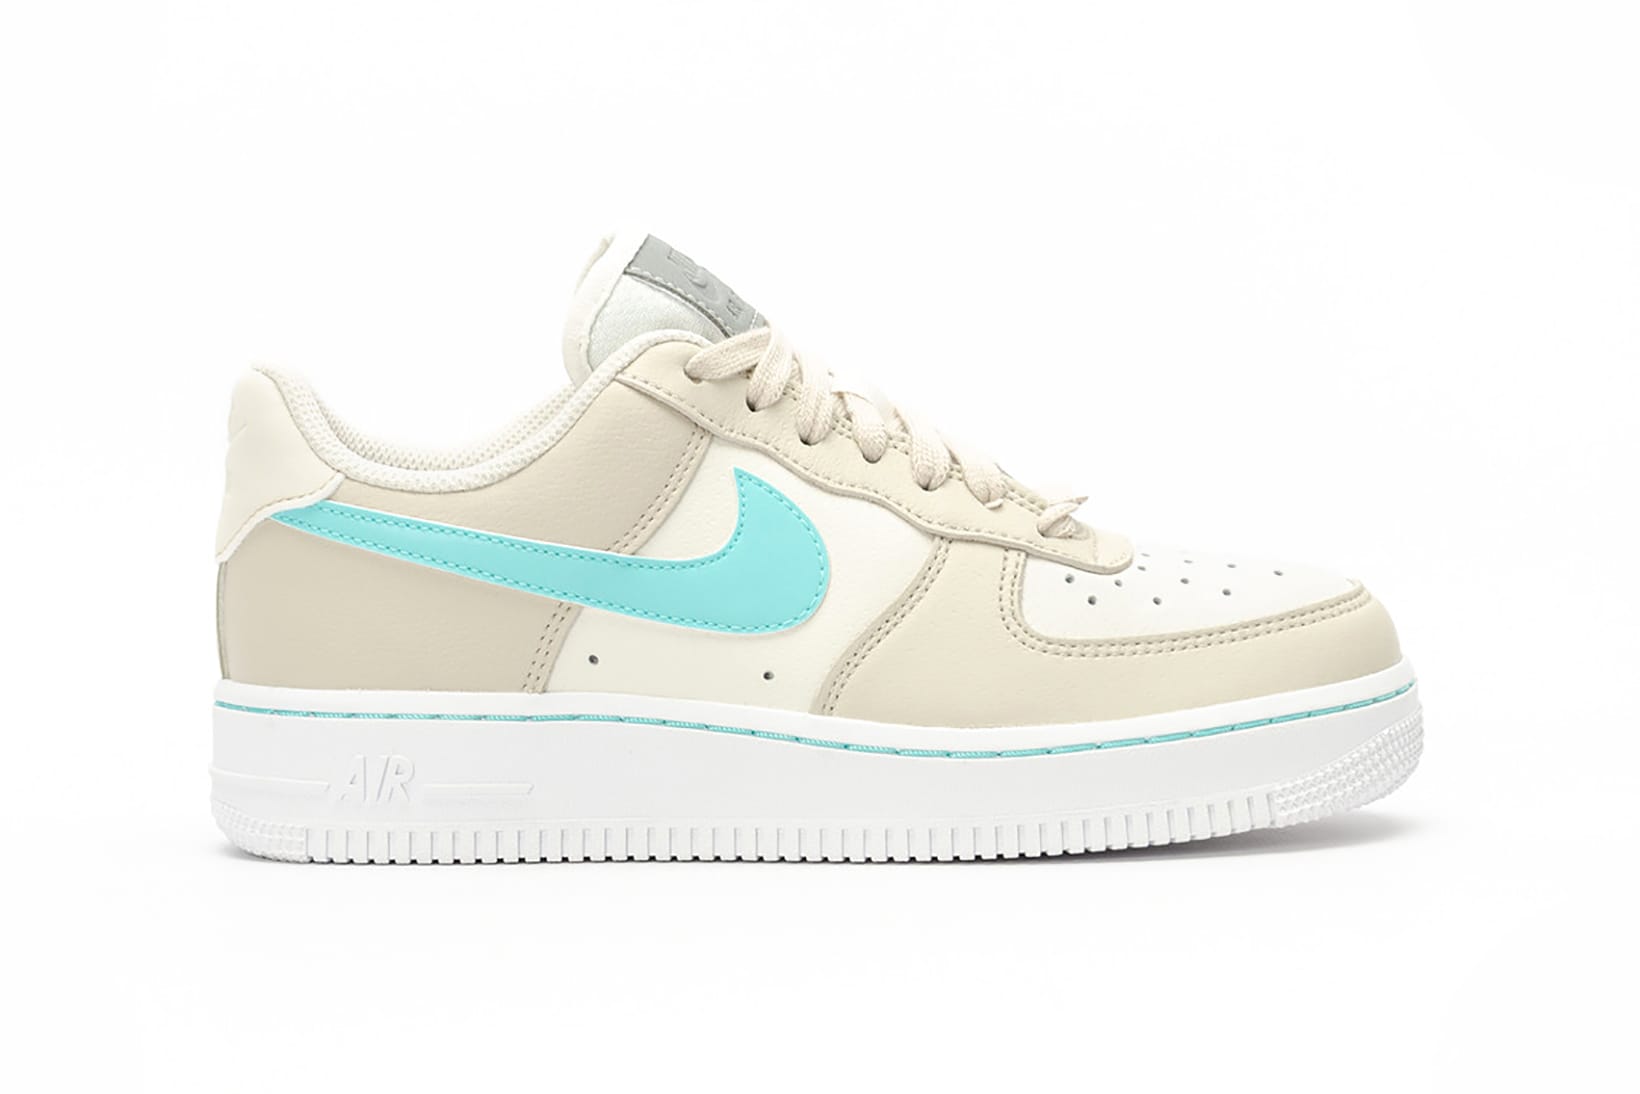 nike air force 1 low canvas desert sand